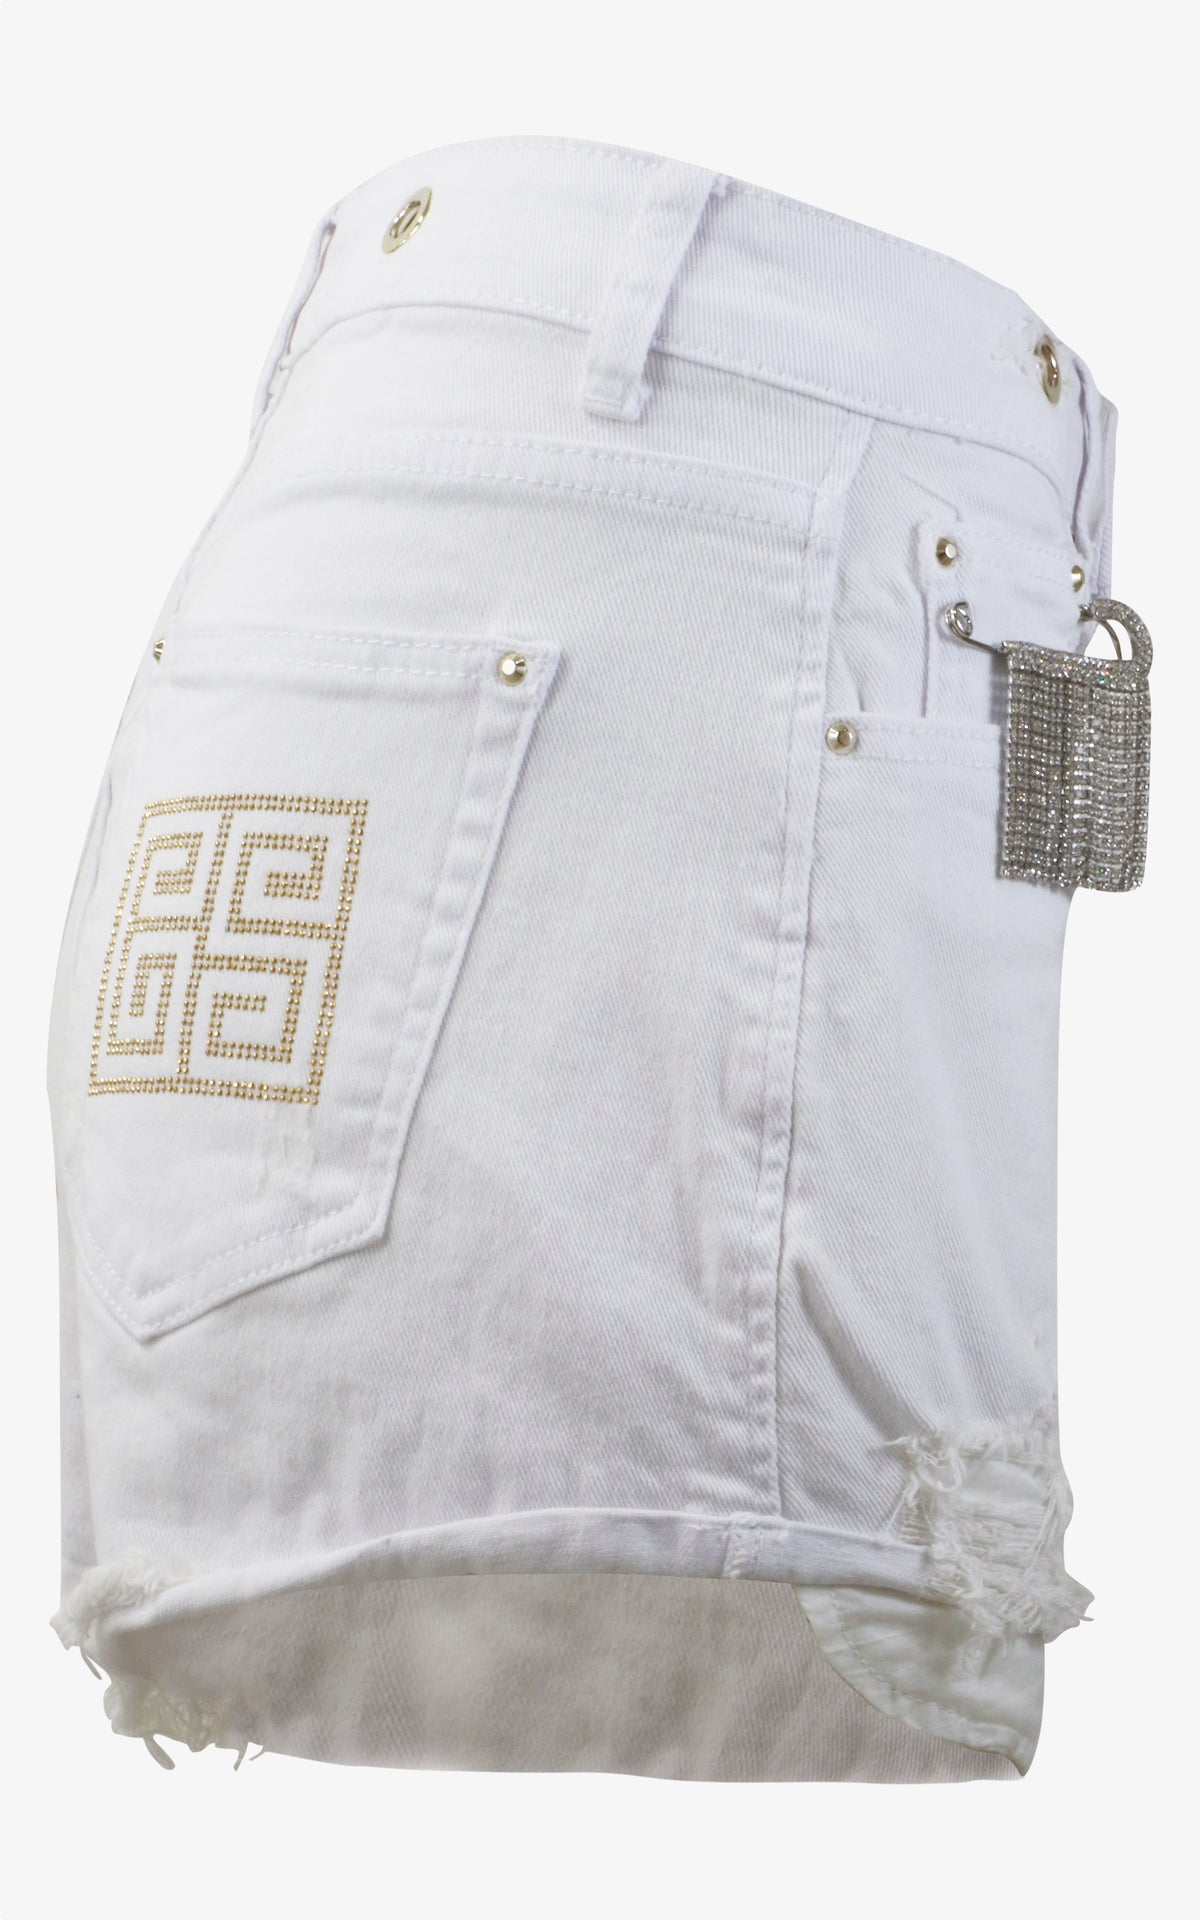 Couture Shorts